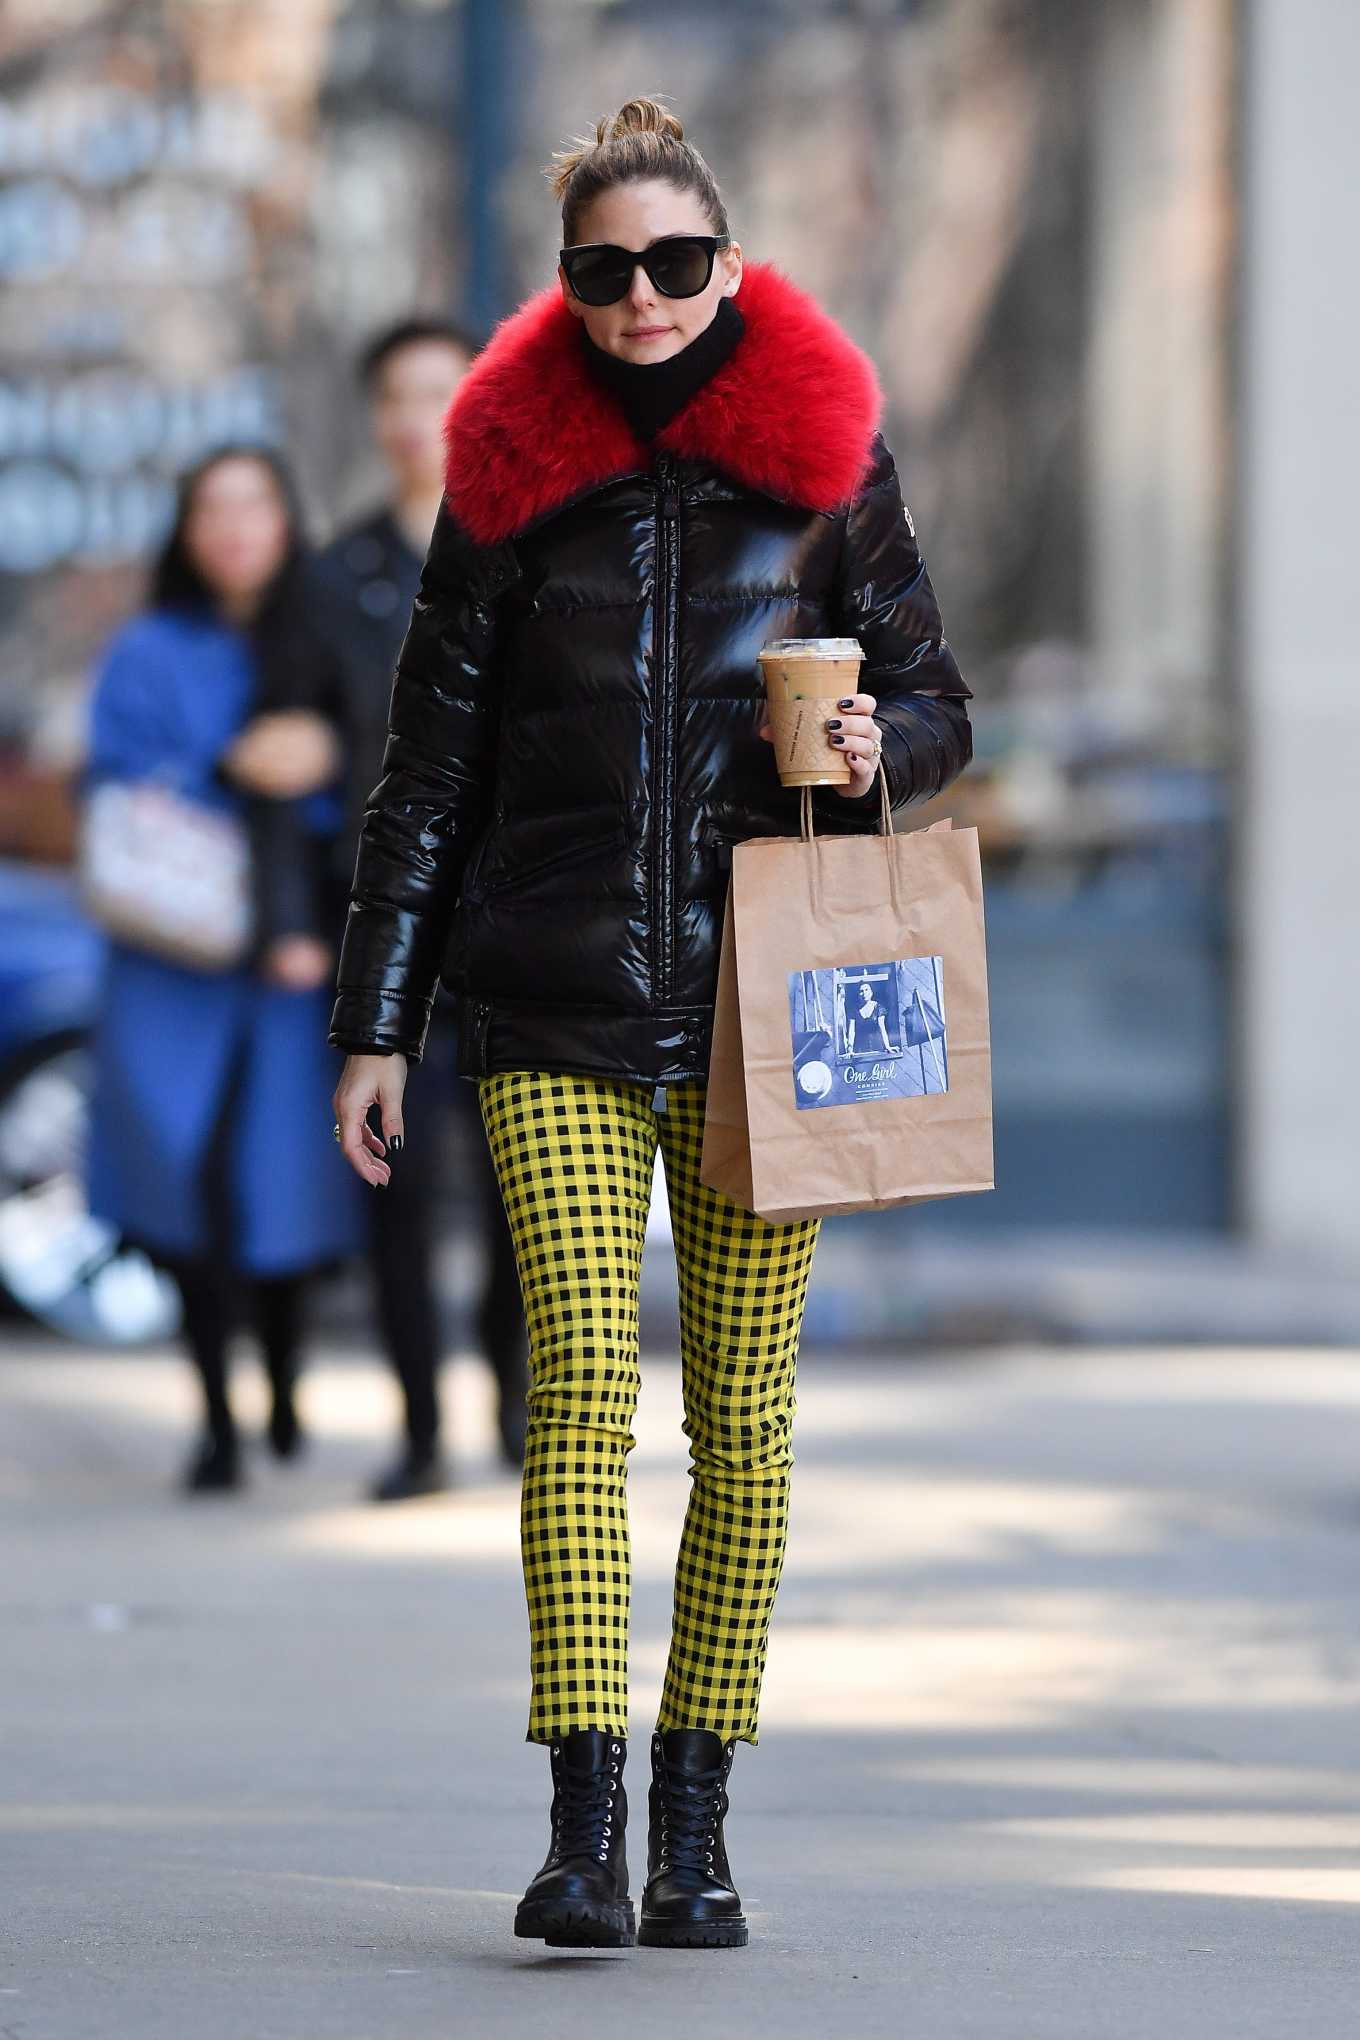 Olivia Palermo Wearing Yellow Patterned Pants With A Black Jacket